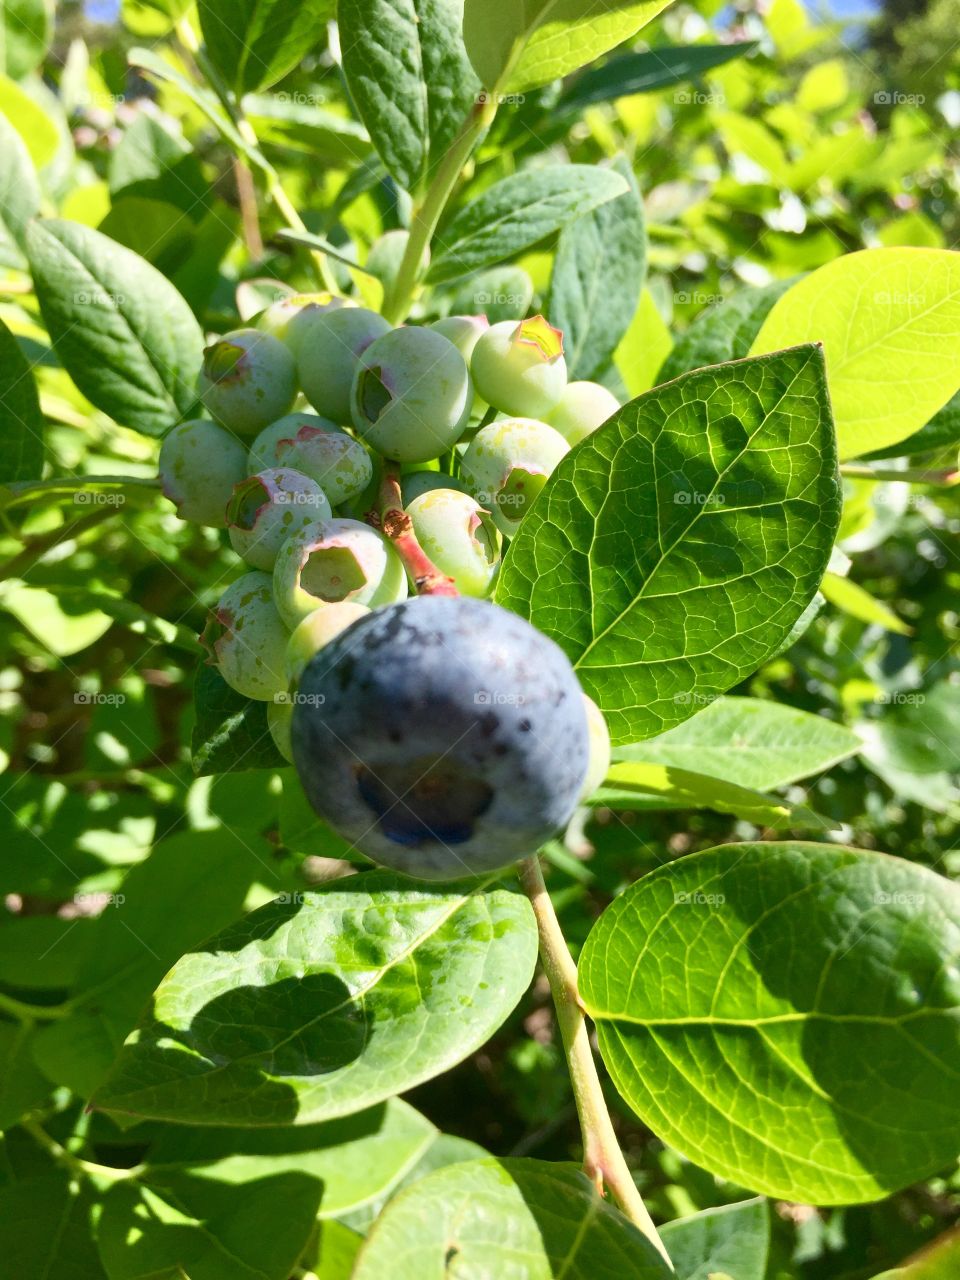 Blueberries are almost ready for picking 